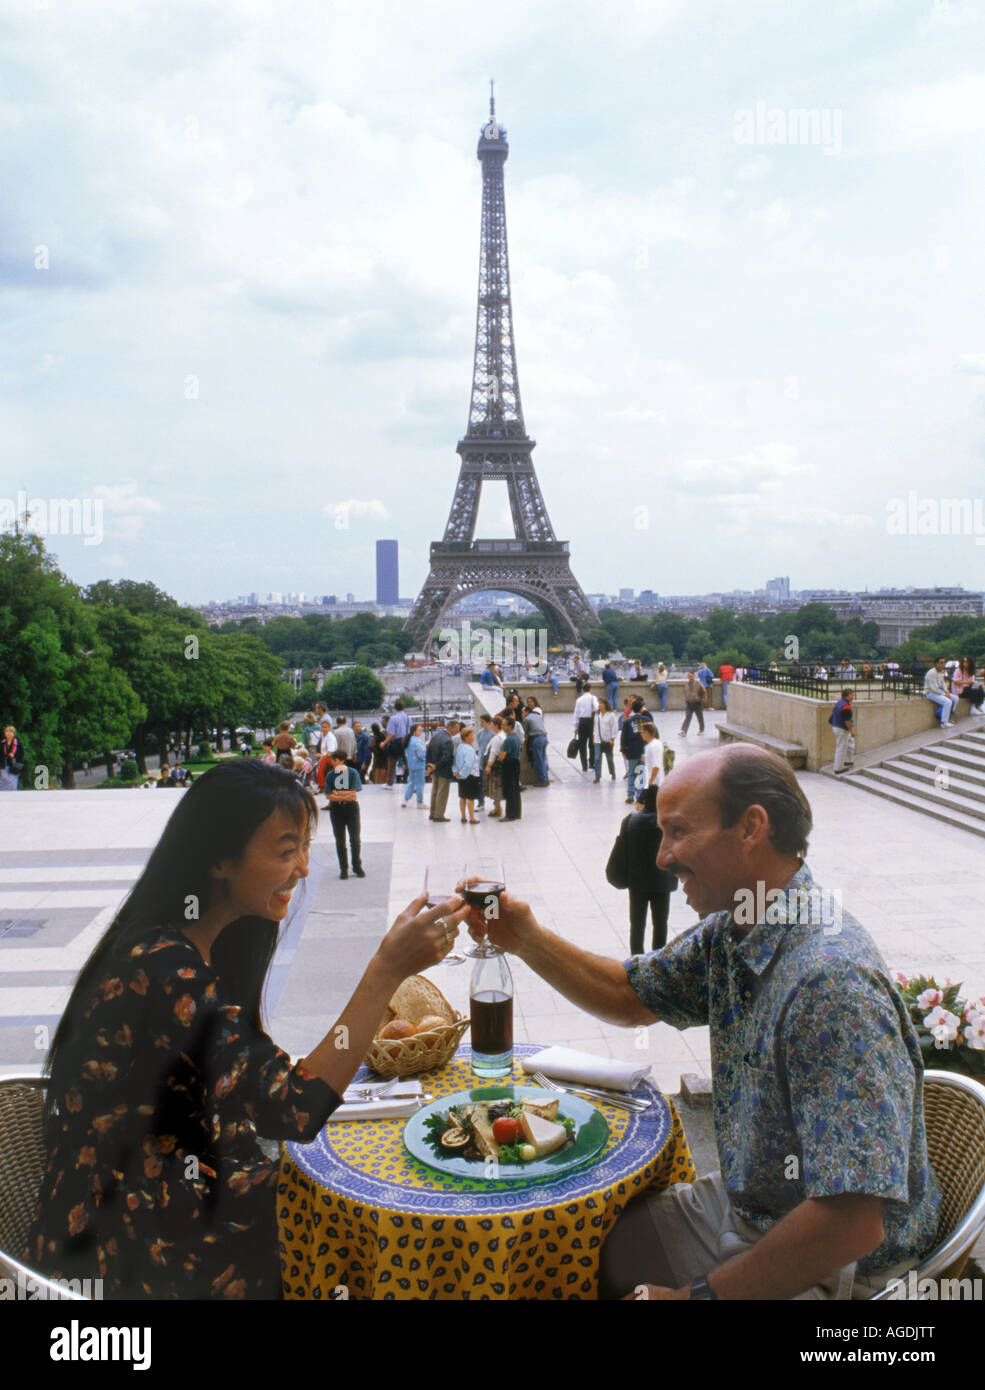 French wine, cheese, bread and tablecloth at Trocadero restaurant with Eiffel Tower and passing tourists Stock Photo